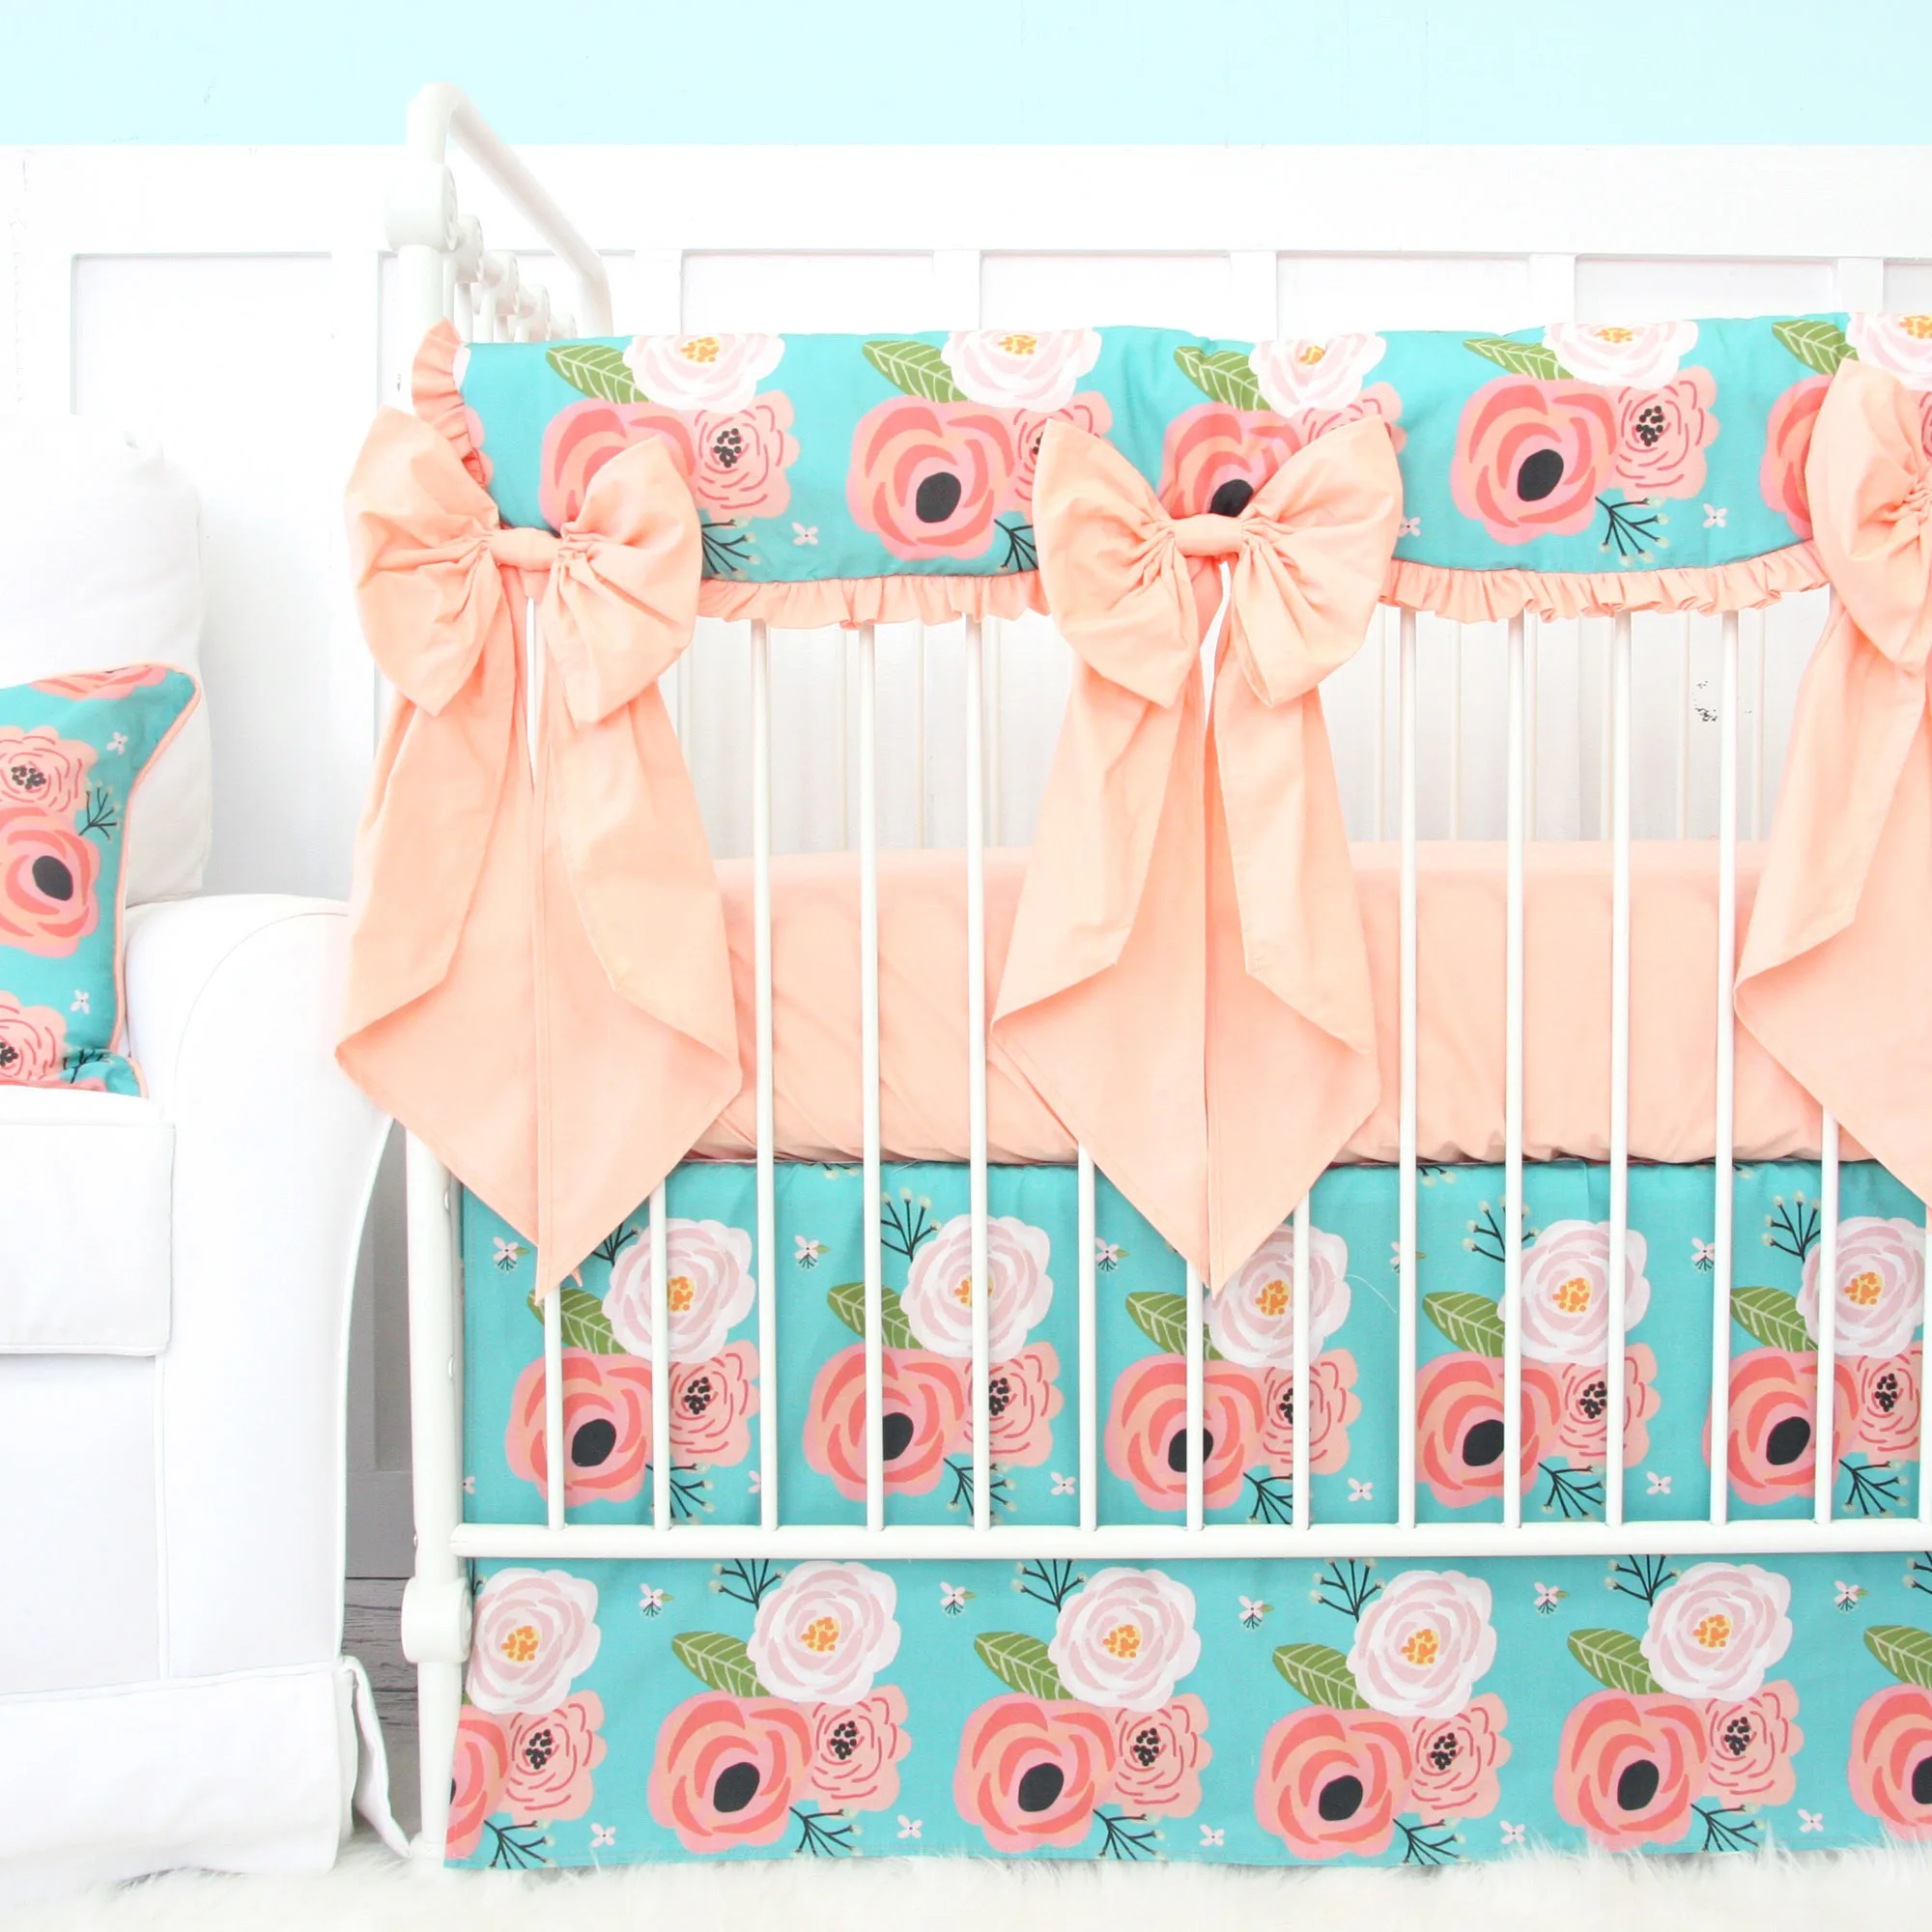 sloanes-coral-and-teal-crib-bedding-with-bows